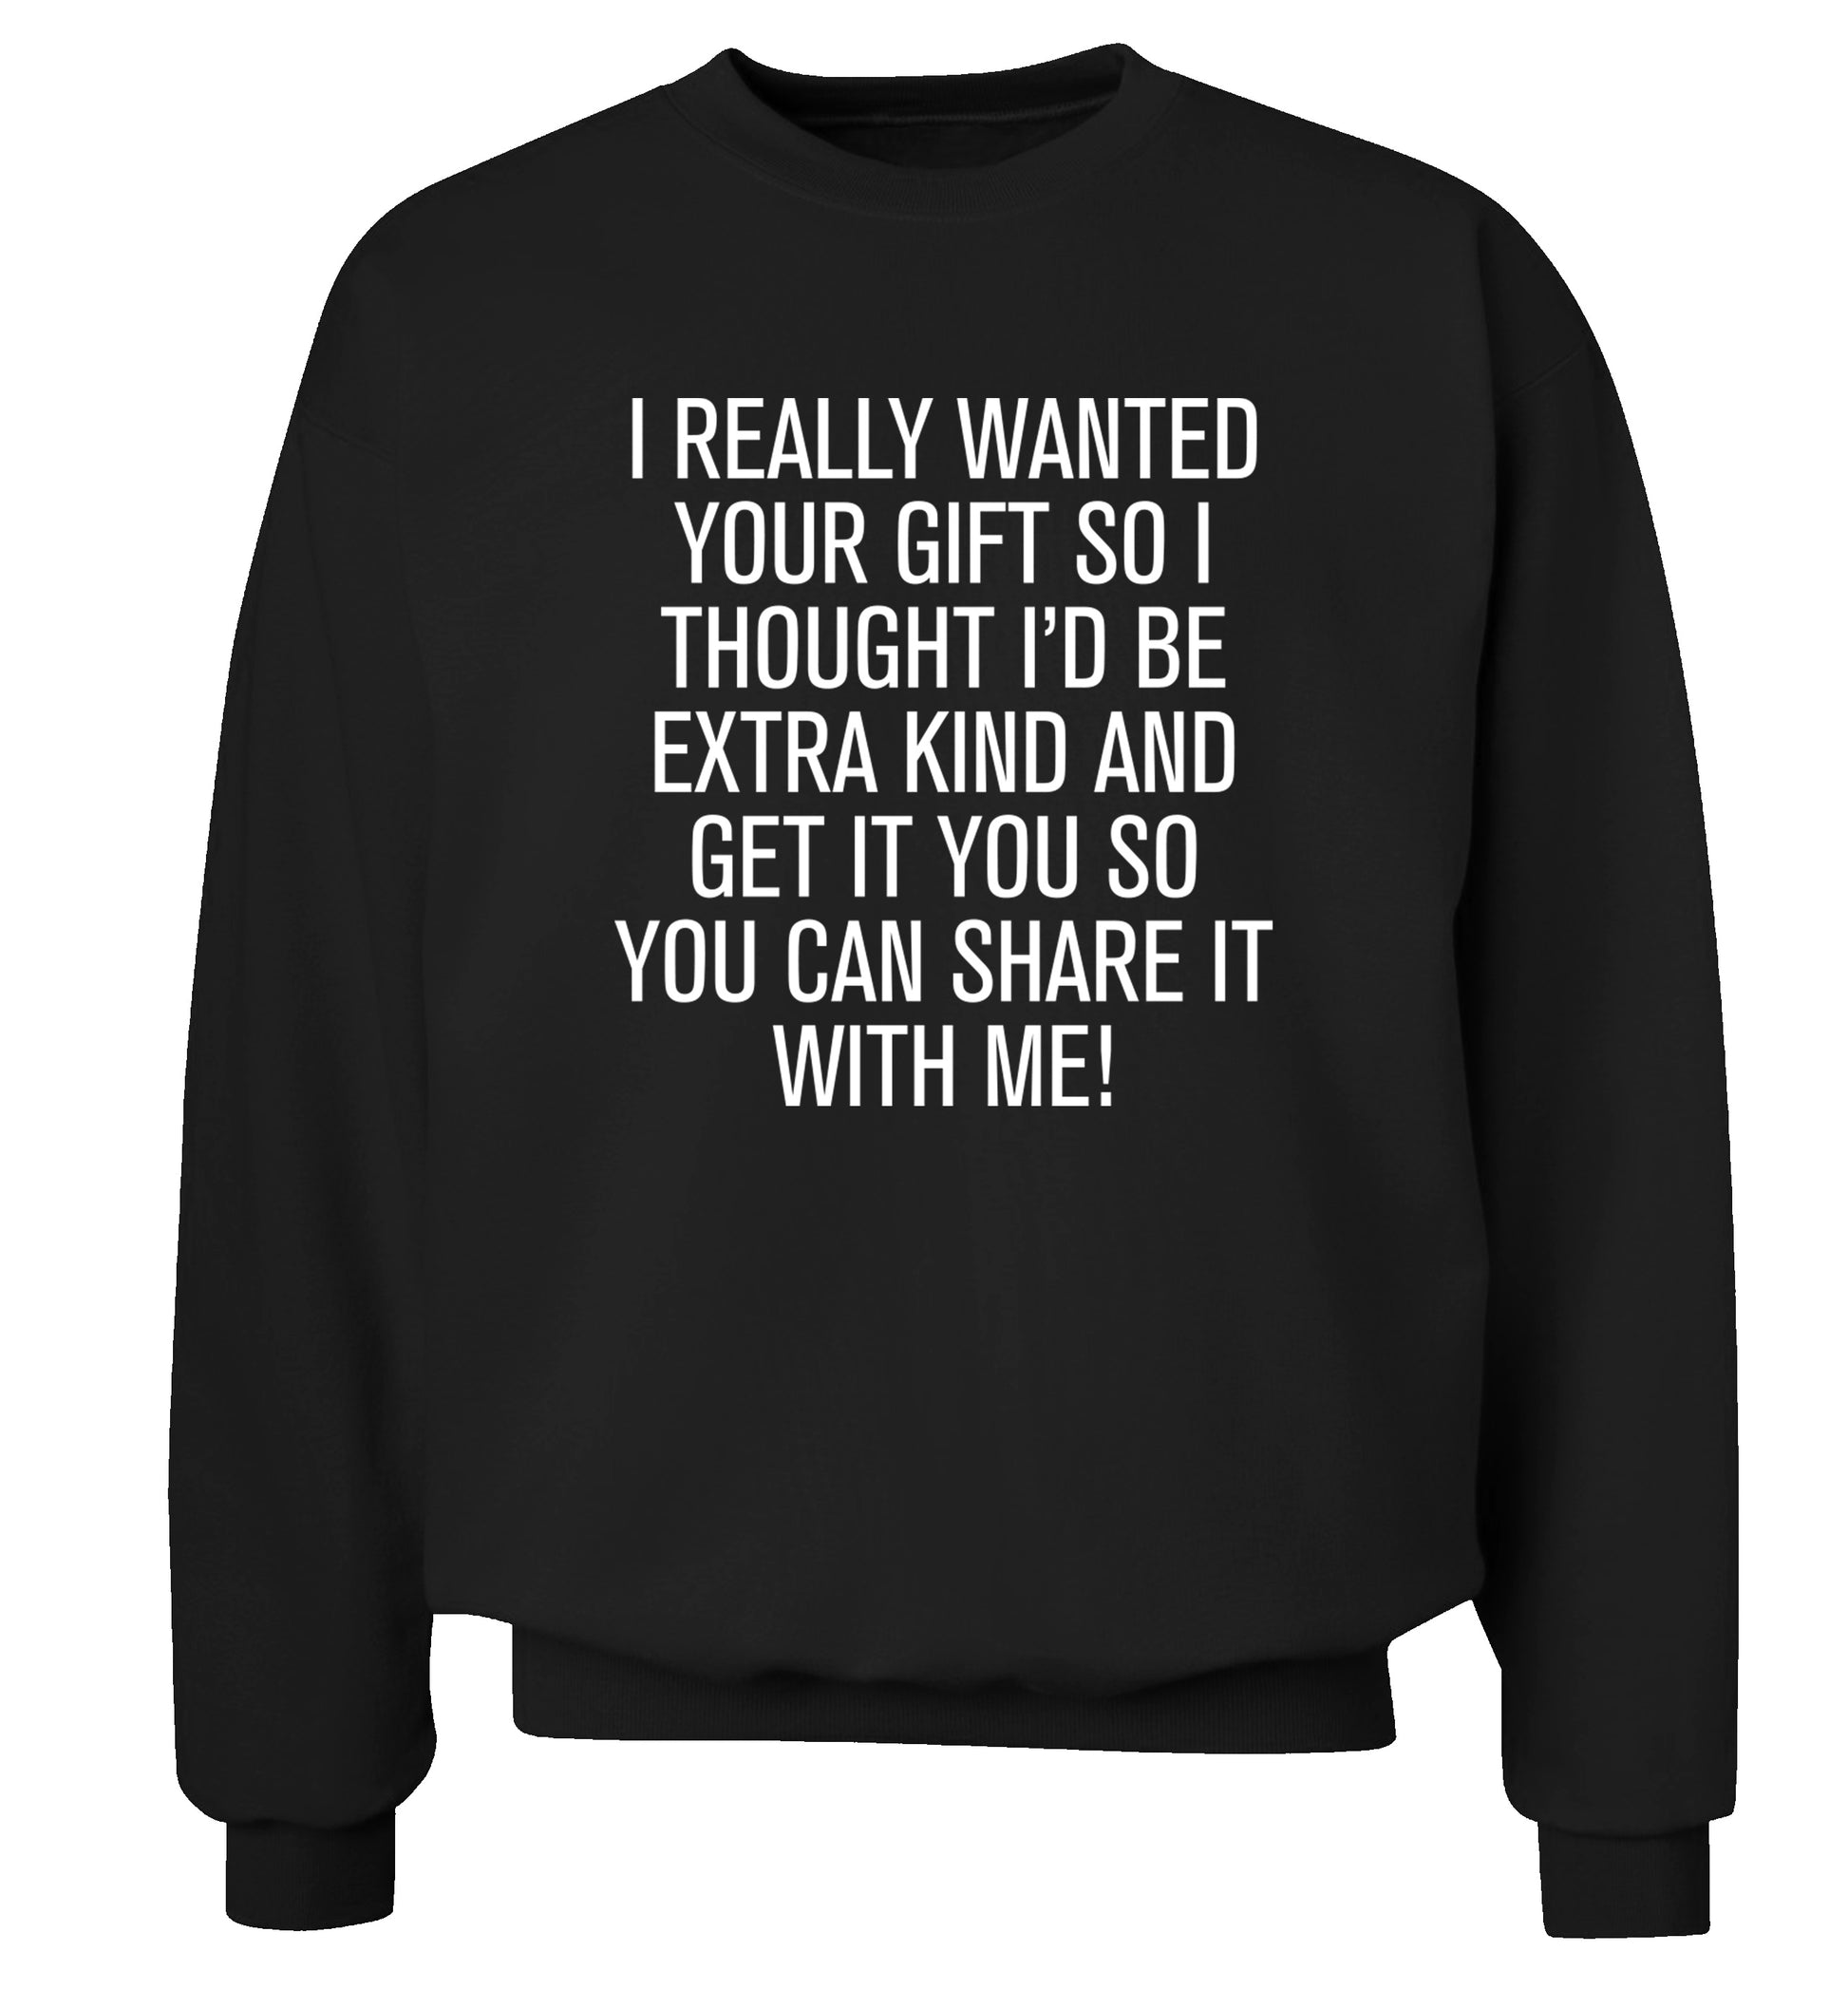 I really wanted your gift Adult's unisex black Sweater 2XL